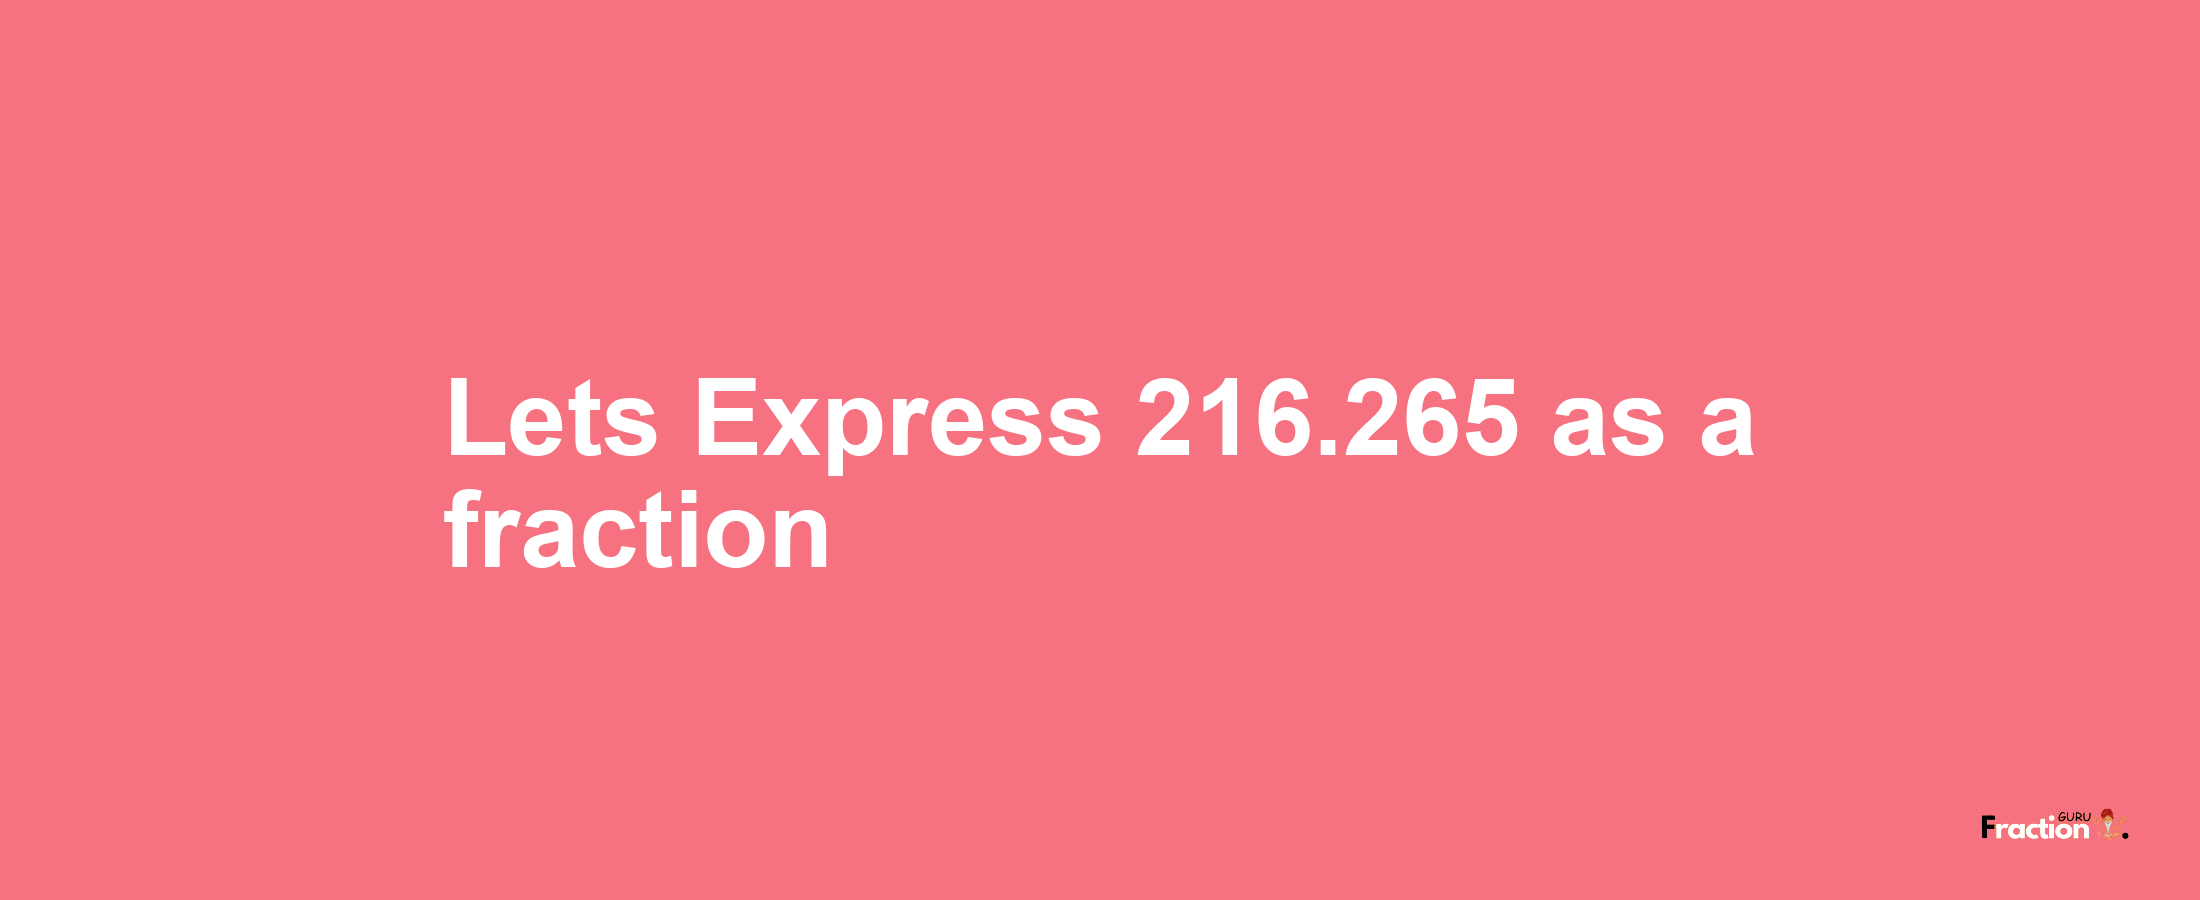 Lets Express 216.265 as afraction